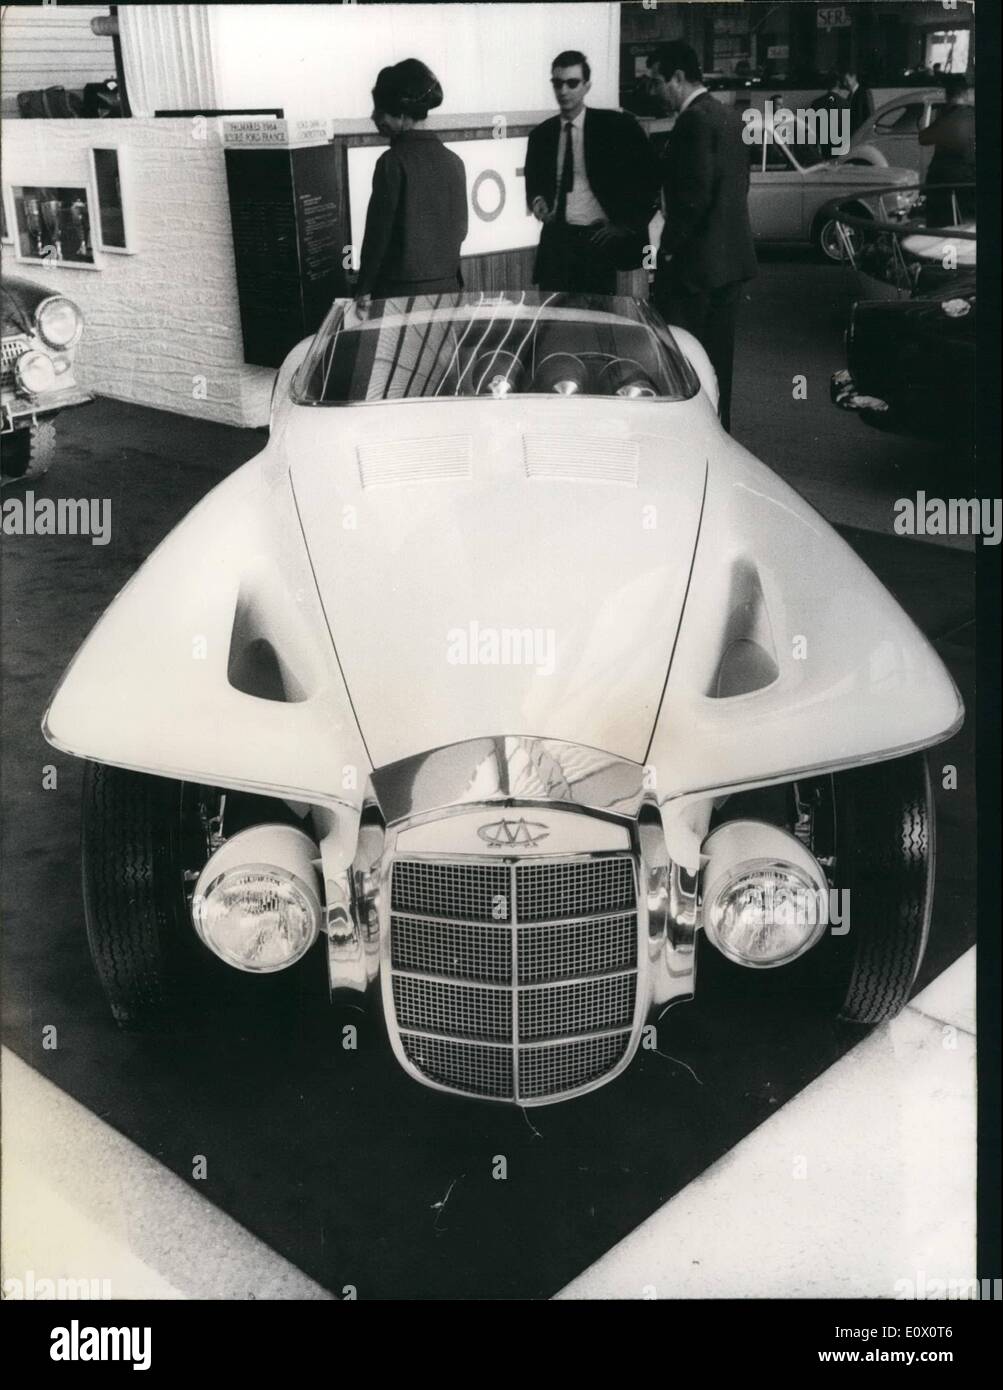 Oct. 10, 1964 - Paris Motor Show Opens: Photo Shows A Mercer Cobra, a new  car which is nothing Else than a Replica of an old Mercer back to 1911. The  Body